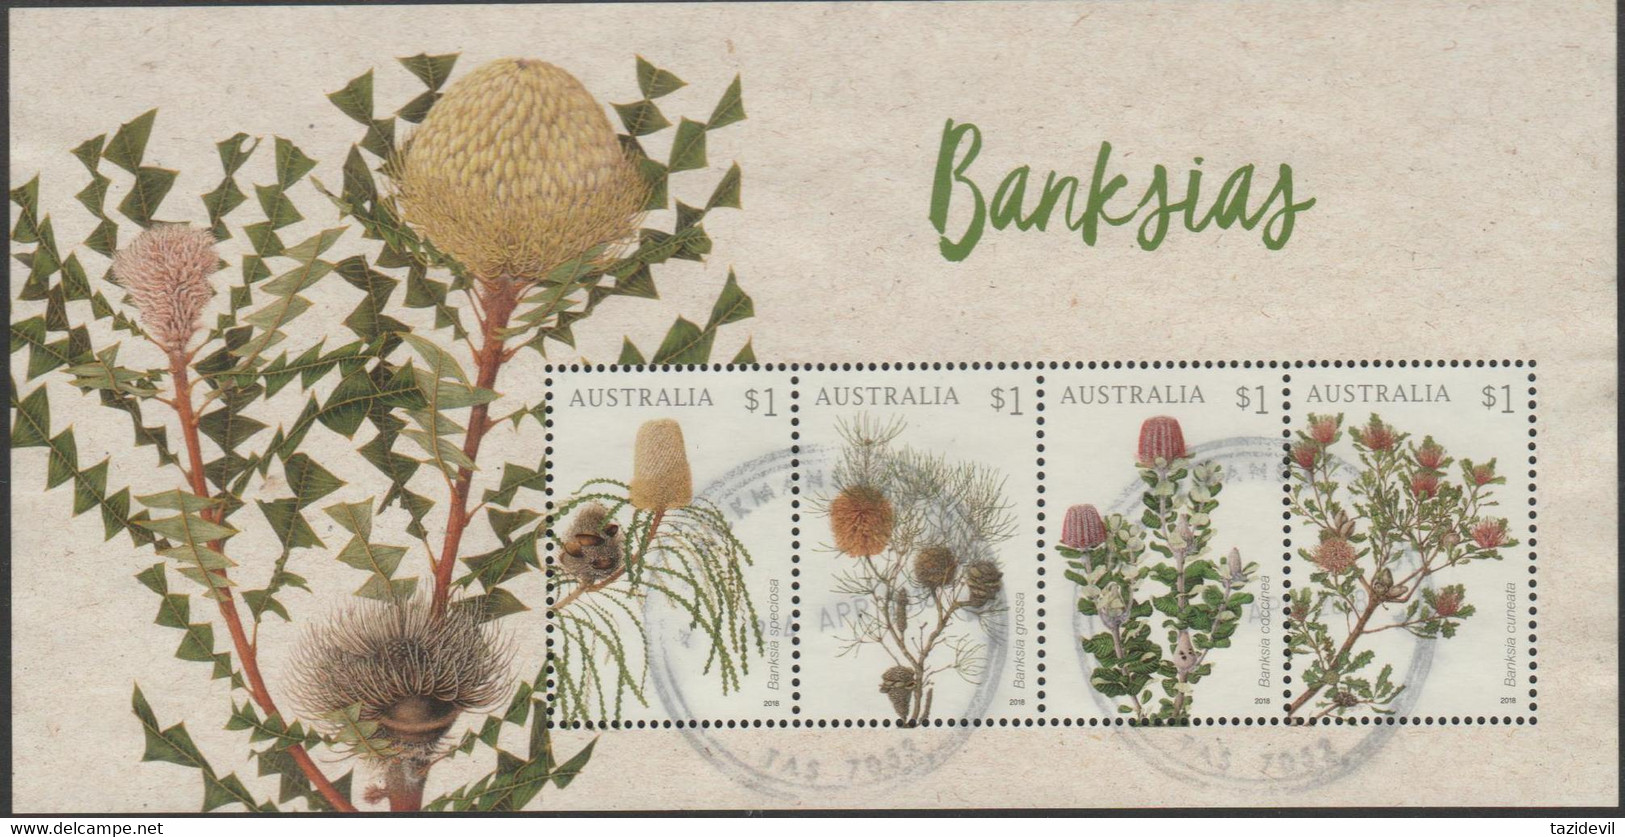 AUSTRALIA - USED 2018 $4.00 Banksia's Souvenir Sheet - Flowers - Used Stamps